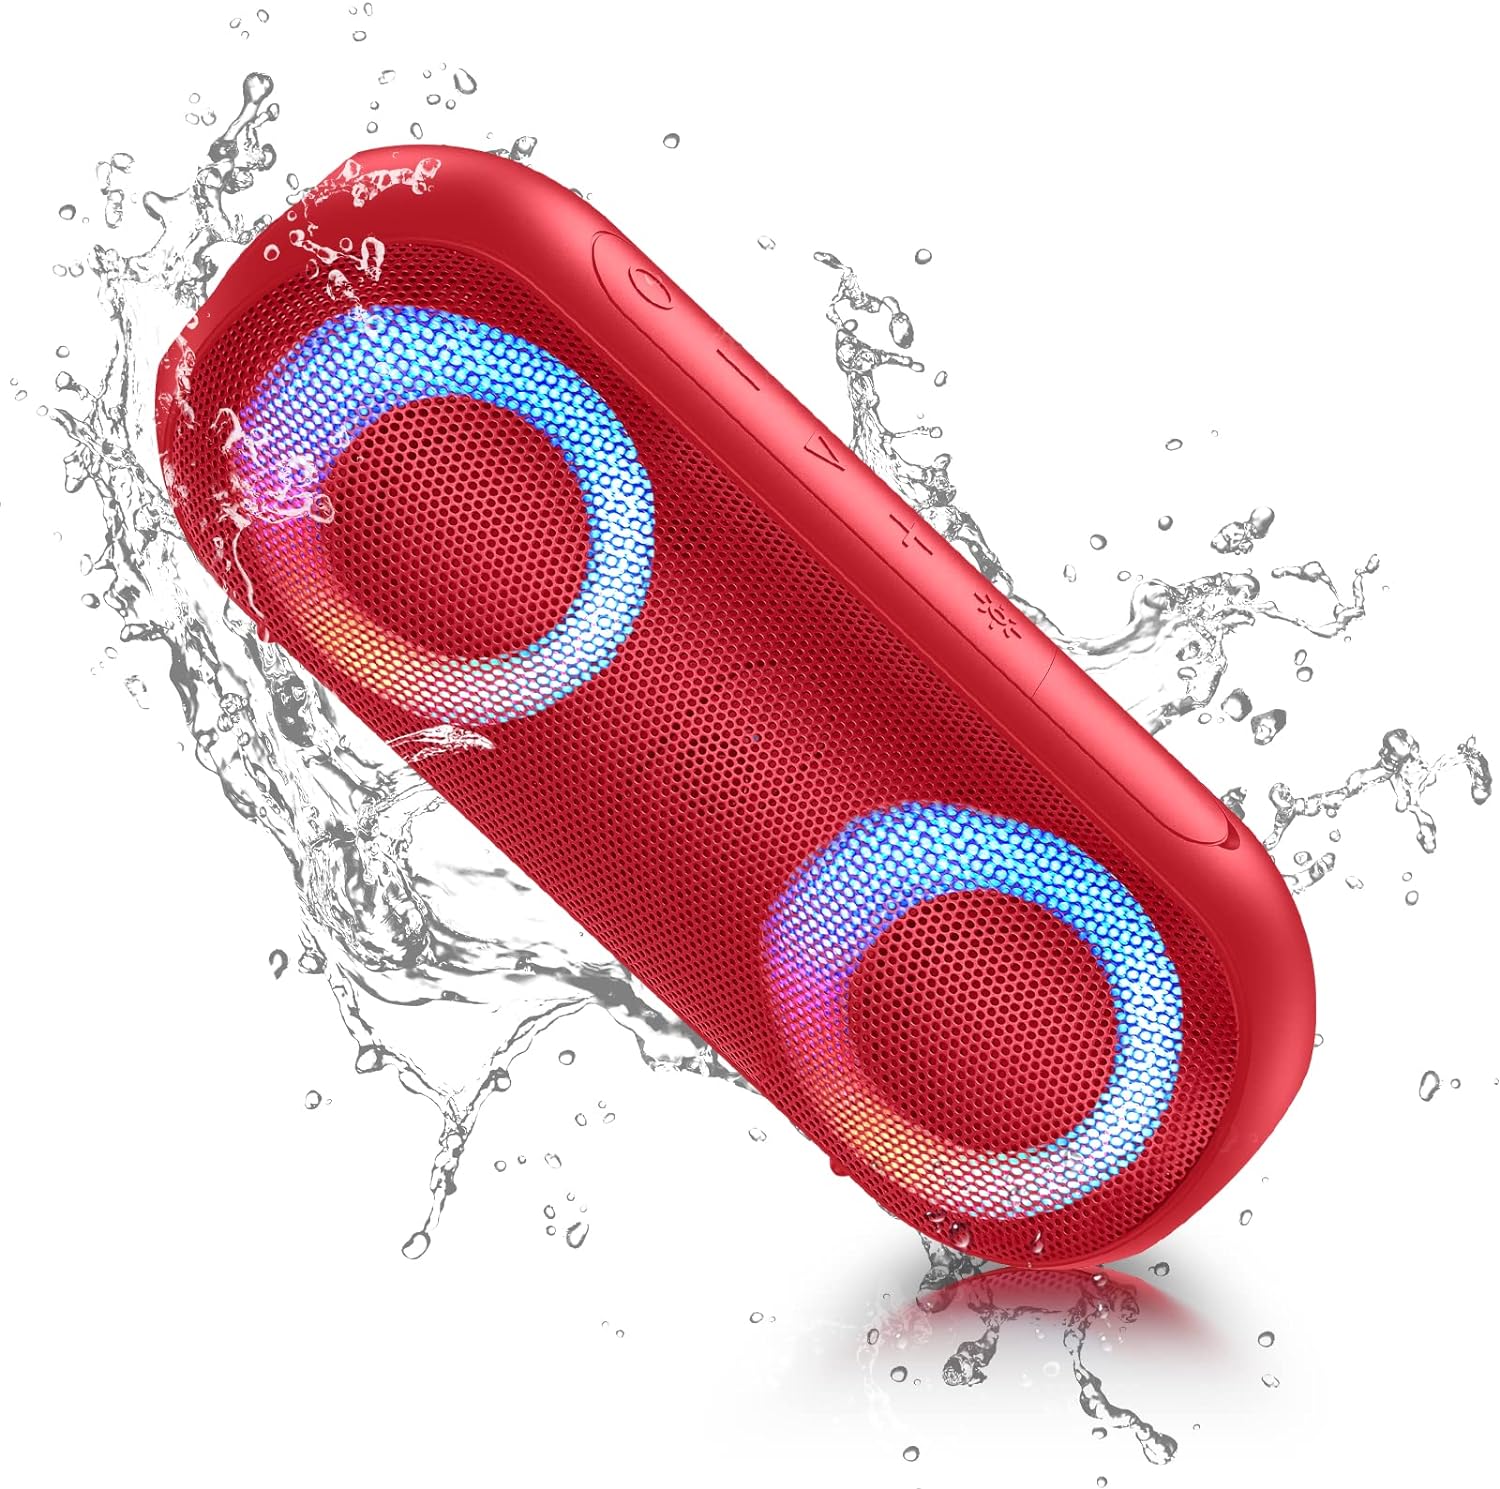 NOTABRICK Bluetooth Speakers,Portable Speakers Wireless(100FT Range) with 30W Loud Stereo Sound,IPX7 Waterproof Shower Speakers,RGB Multi-Colors Rhythm Lights,1000mins Playtime for Indoor&Outdoor